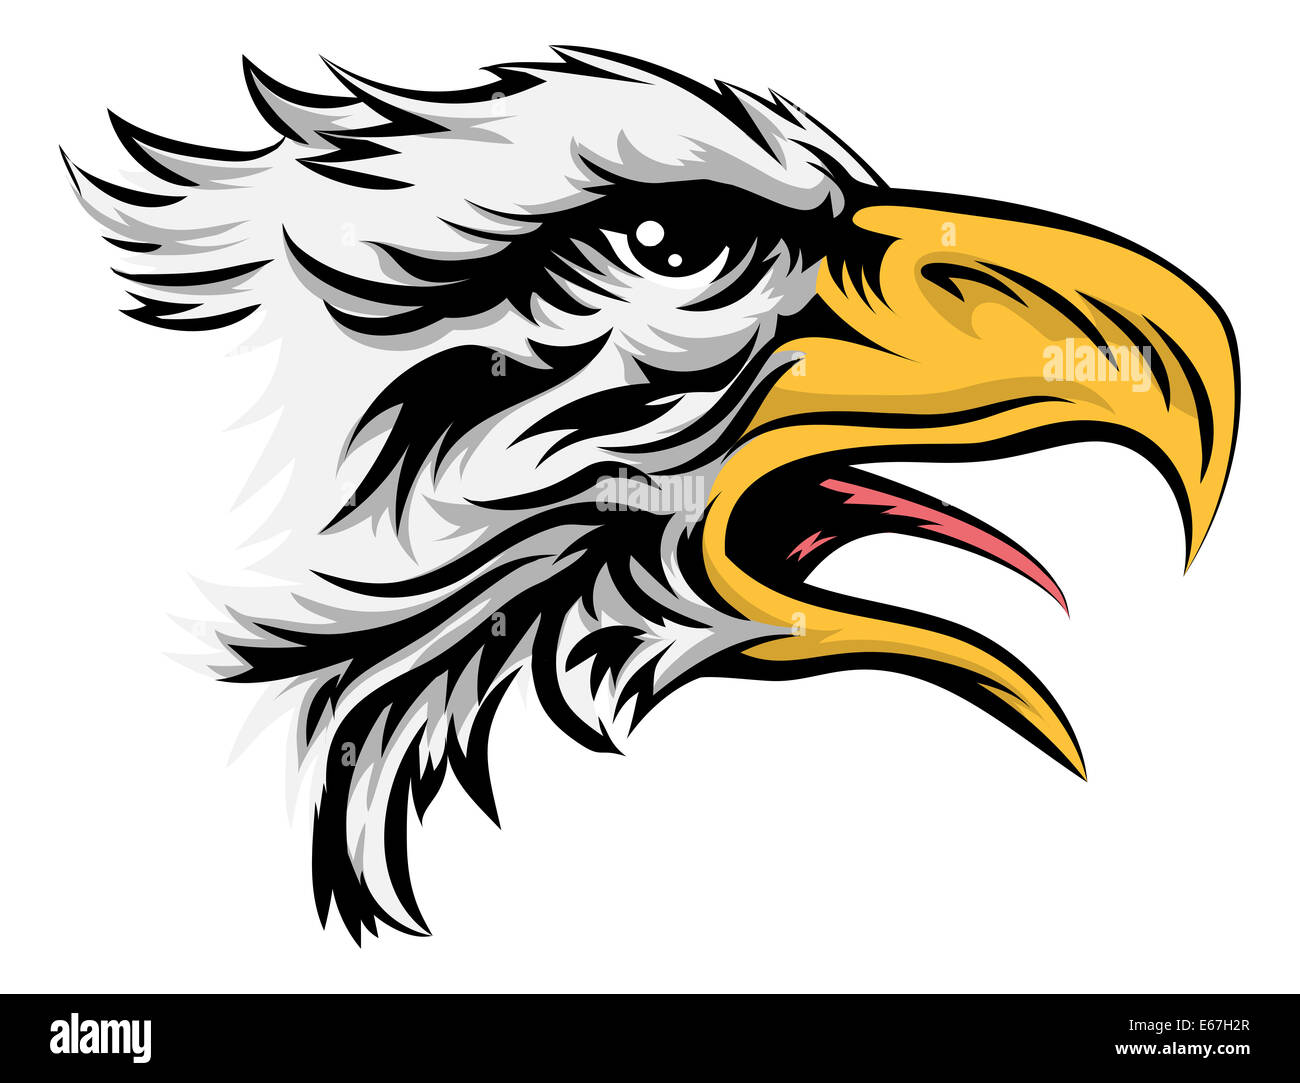 A drawing of a stylised bald eagle bird animal head Stock Photo